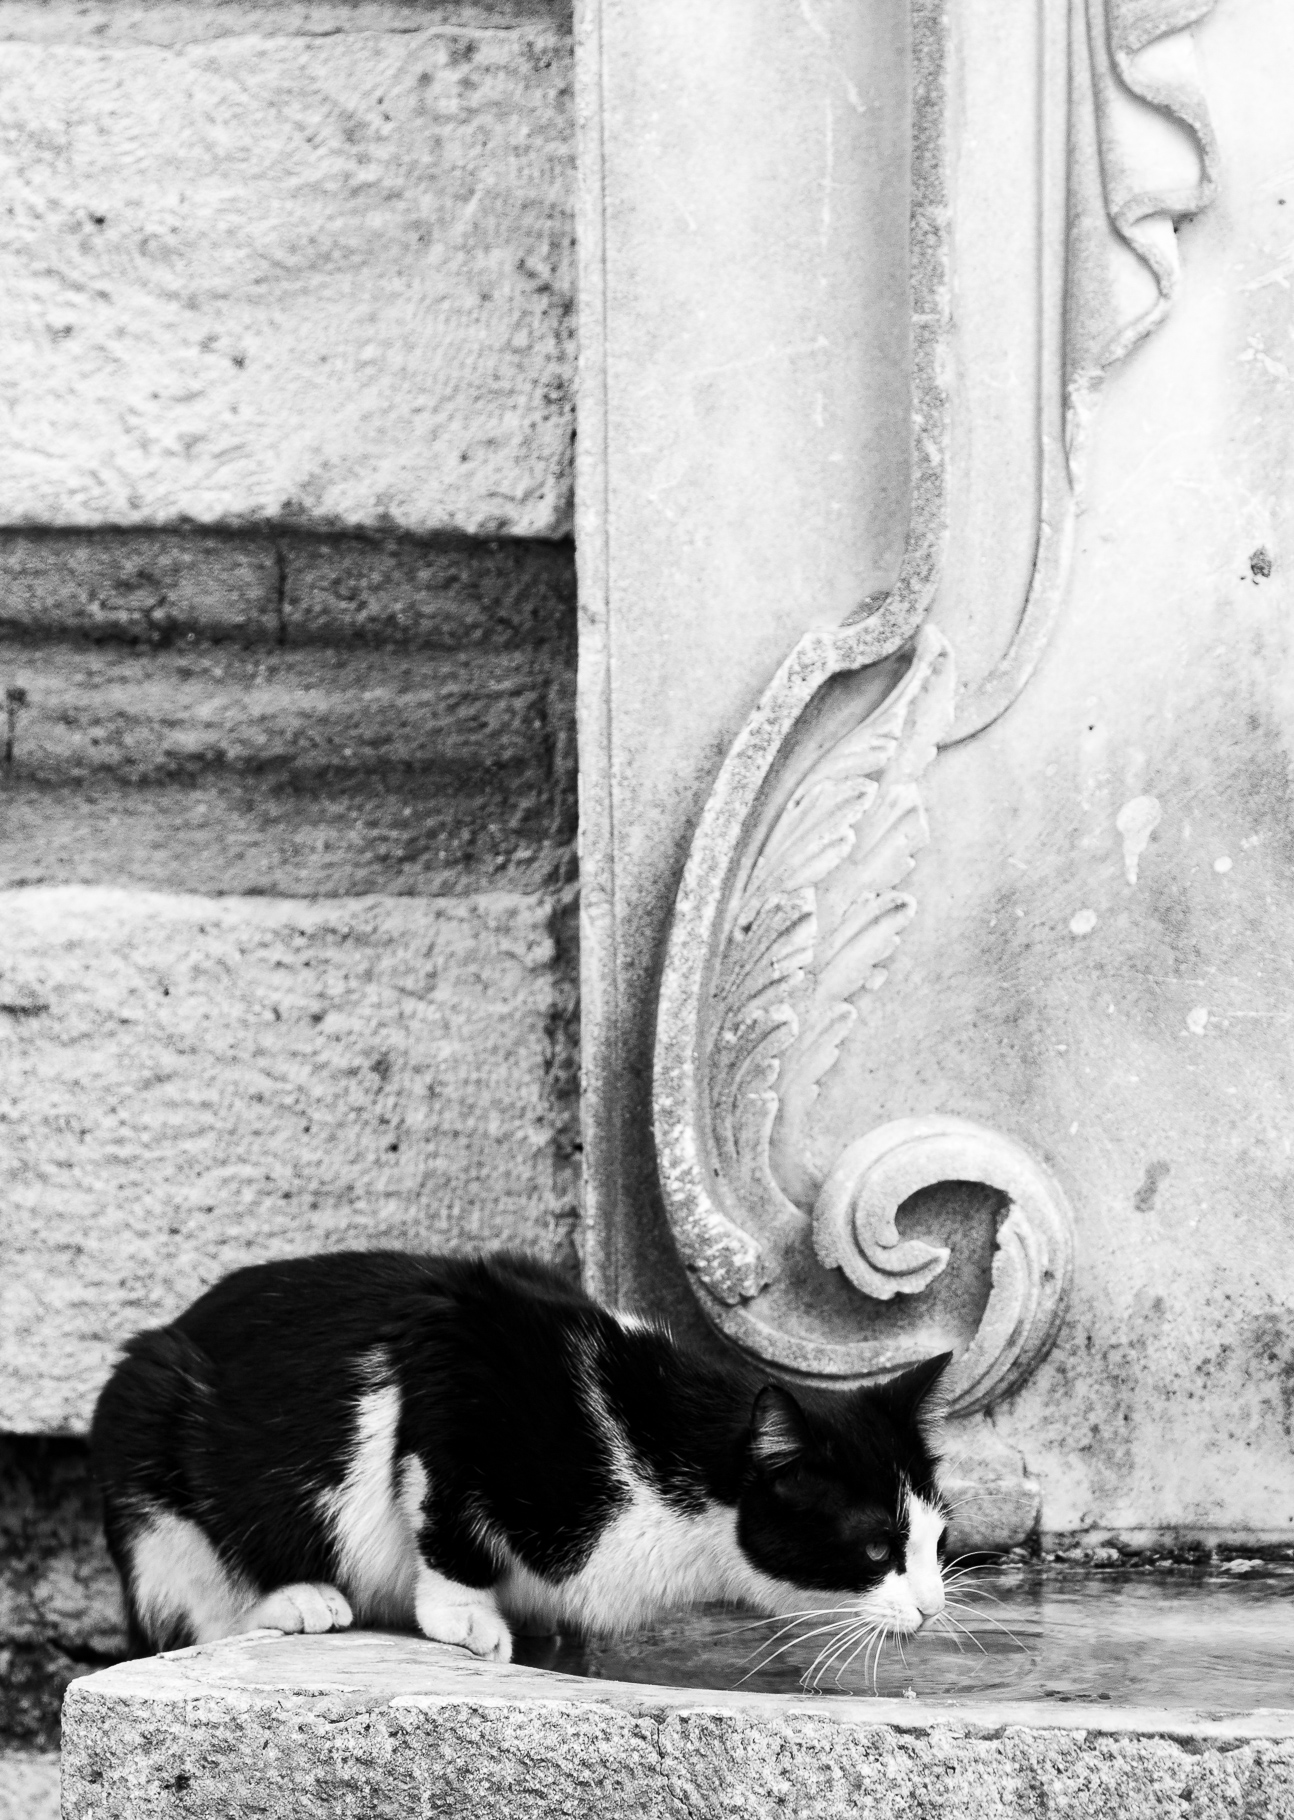 Drinking cat. Istanbul, May 2010